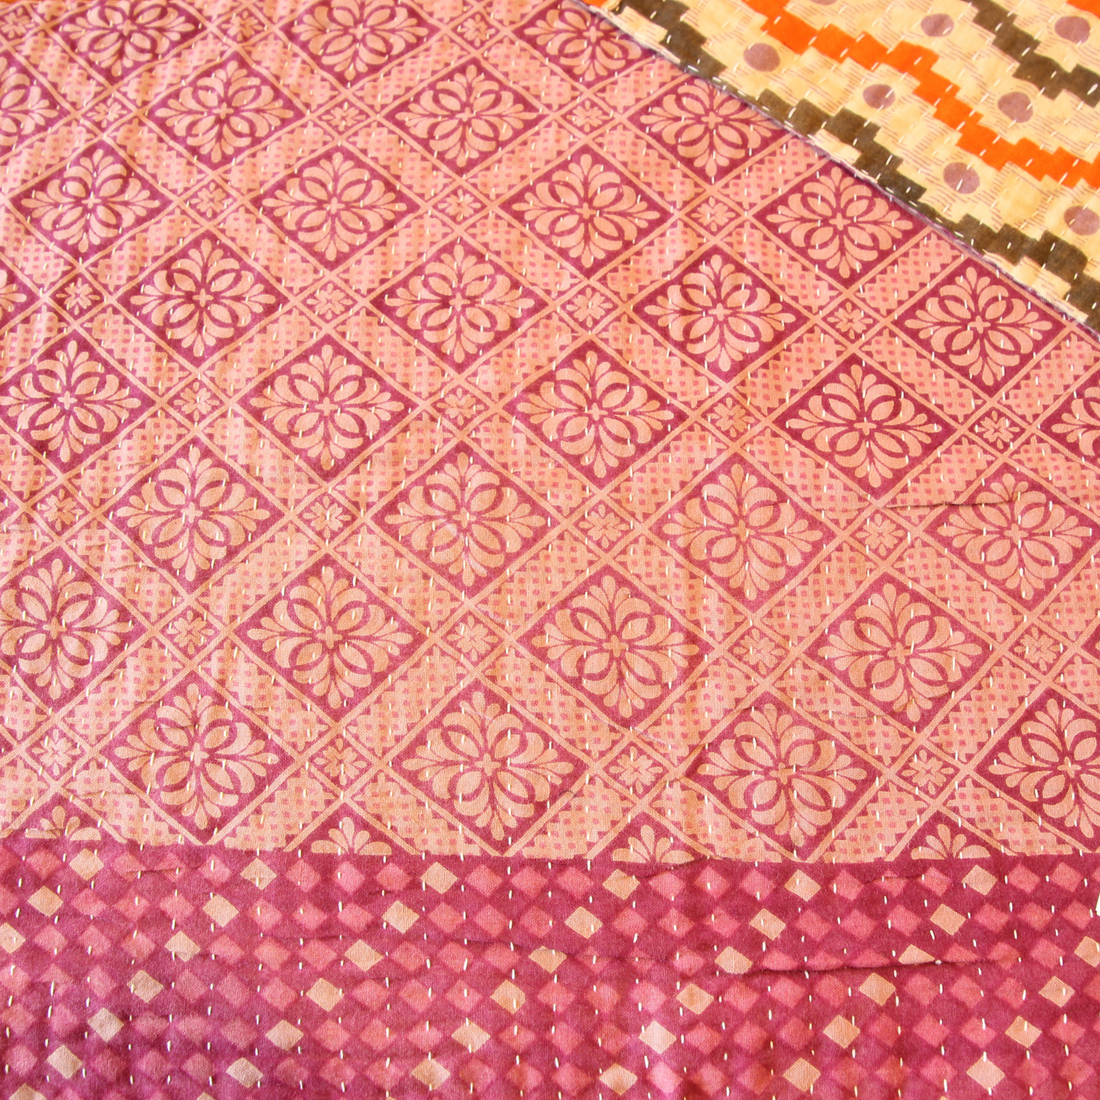 Table and Kitchen fair trade ethical sustainable fashion Cotton Placemats - Dots and Diamonds conscious purchase Basha